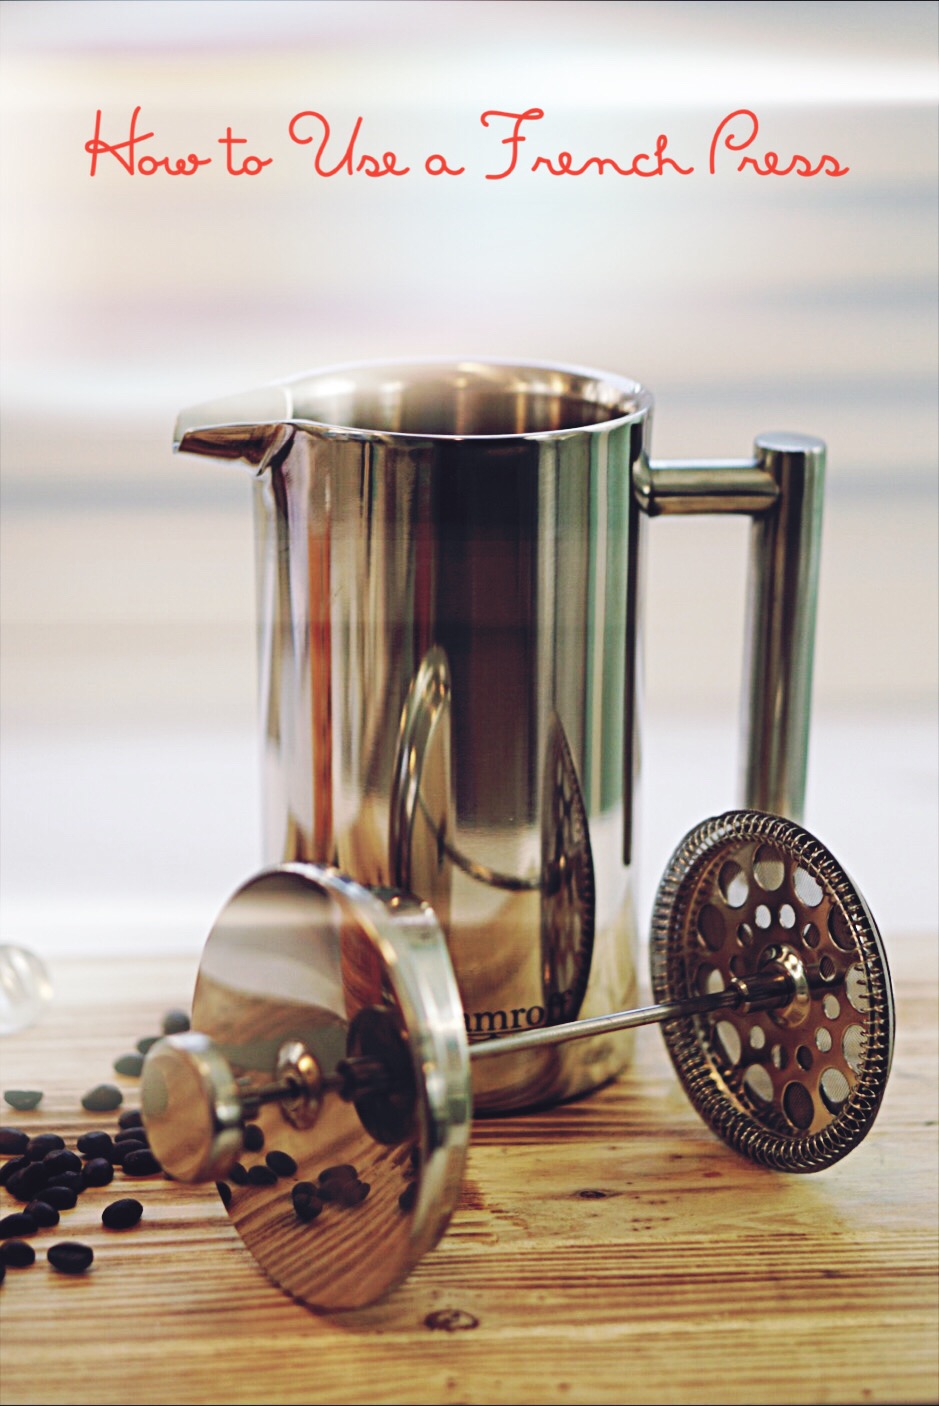 Using a French Press is much easier than it looks. It only takes a bit of knowledge and a bit of practice to have a spectacular cup of coffee!~By Wet Whistle Drinks by Darla Bentley